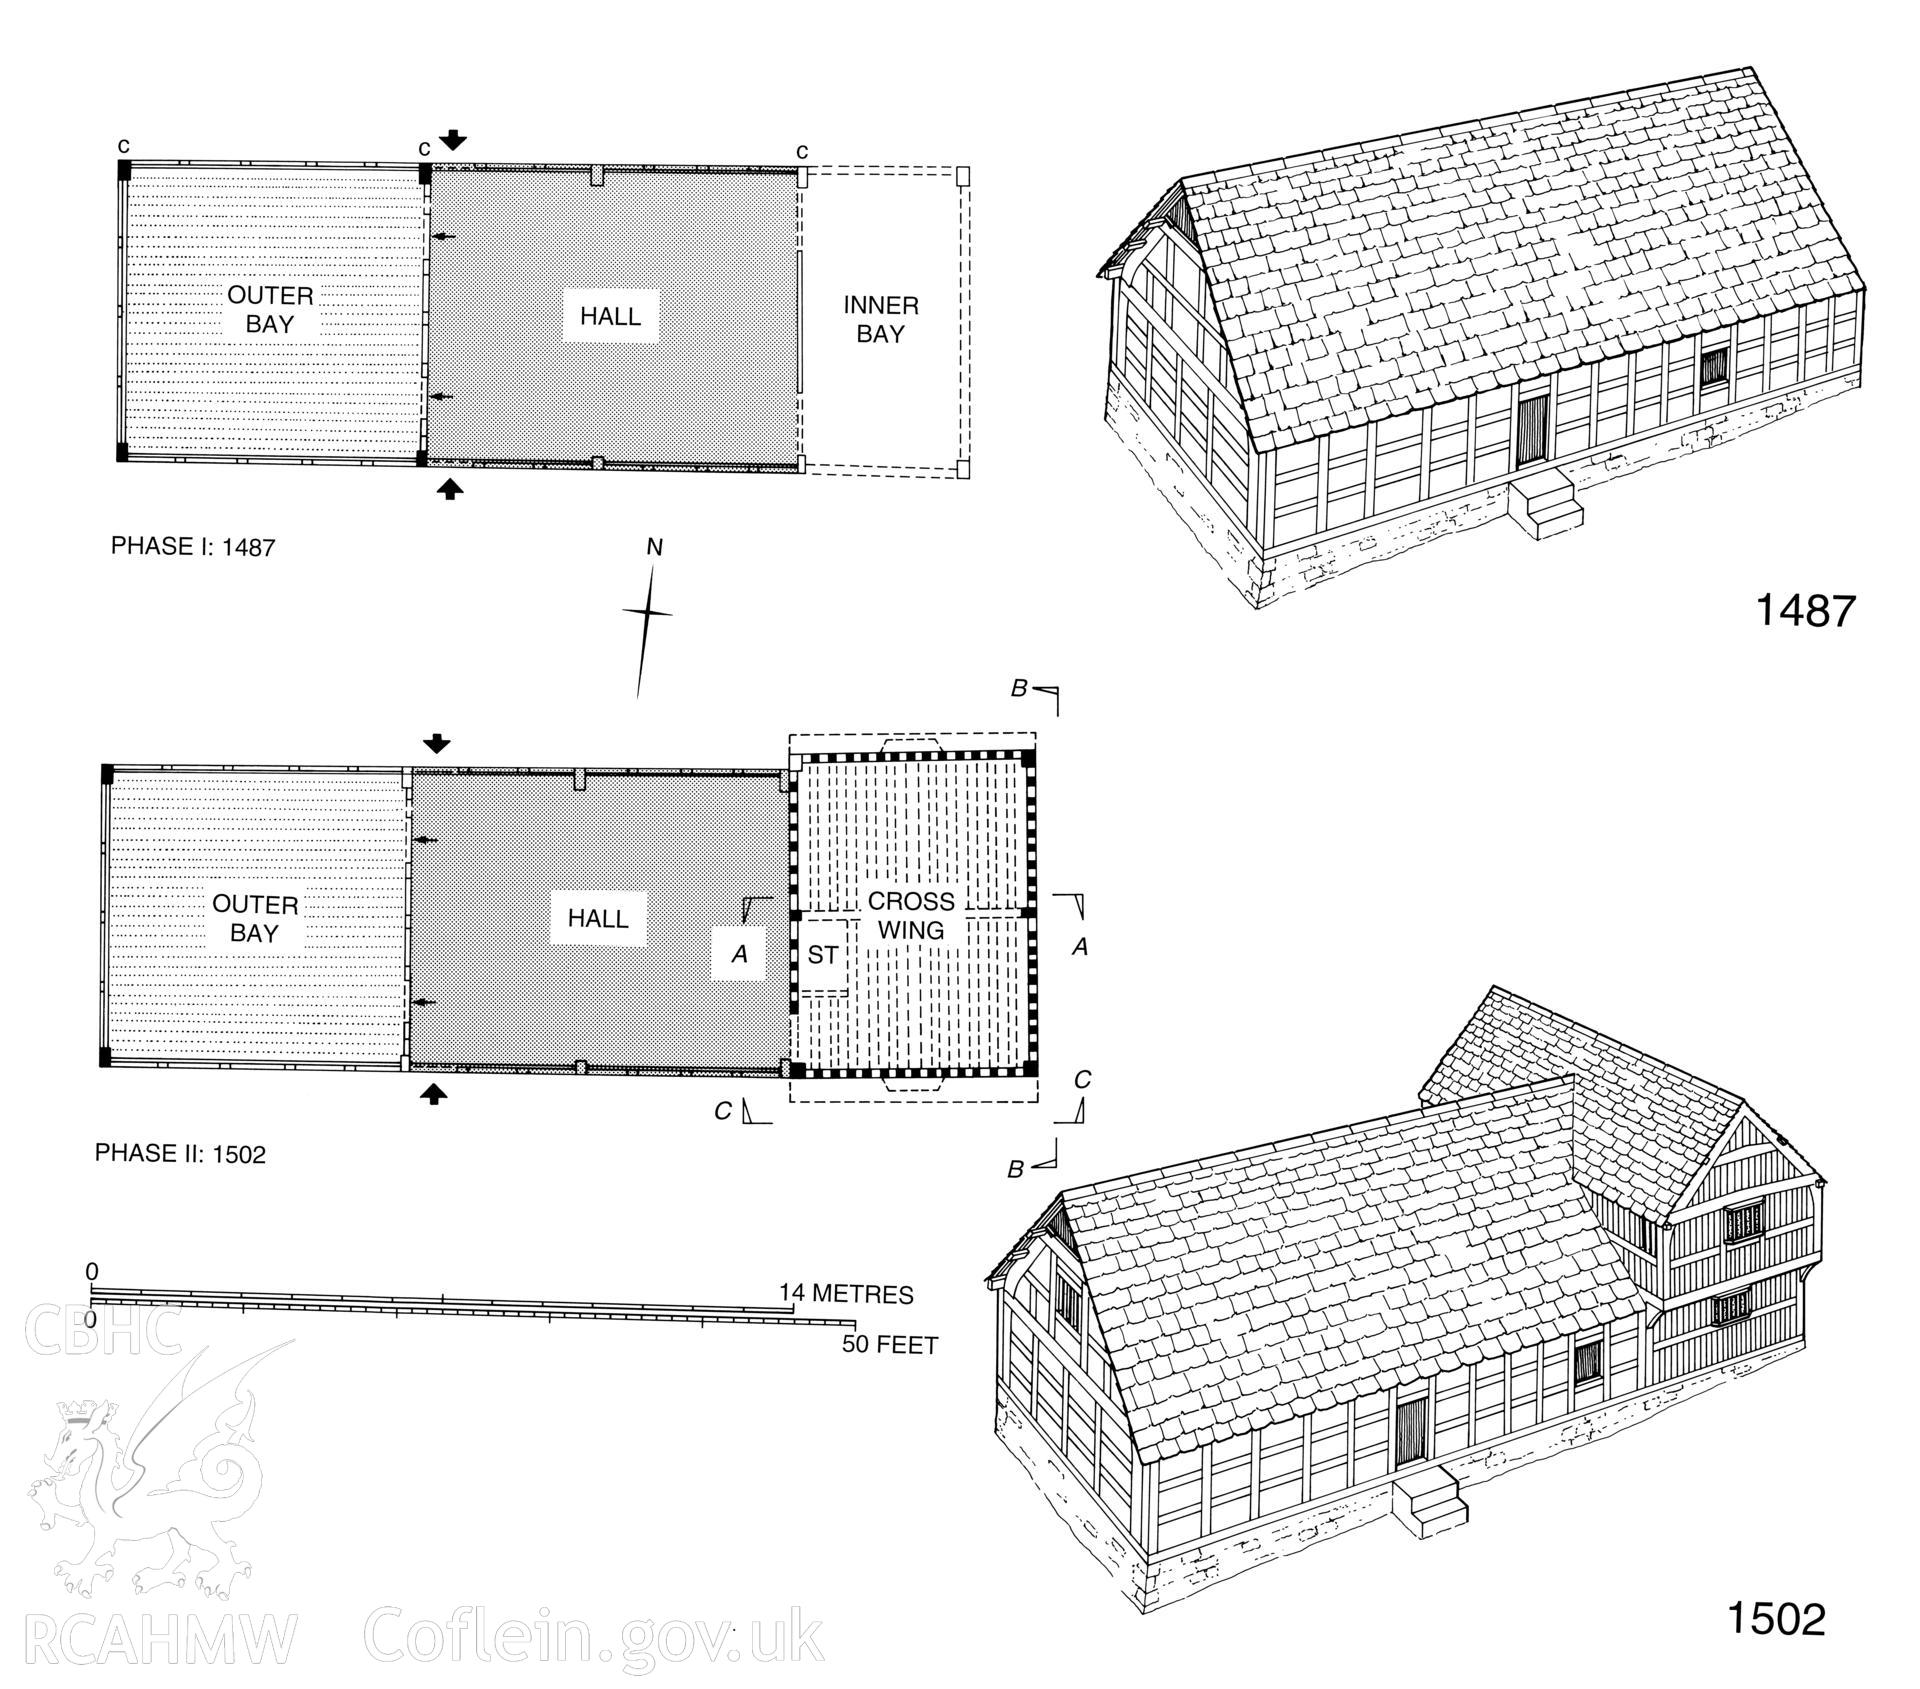 Burfa, Evenjobb; reconstructed plans and perspective views showing phases of development in c.1487 and 1502 A.D, as published in the RCAHMW volume, Houses and History in the Marches of Wales.  Radnorshire 1400-1800,  page 122, figure 121.